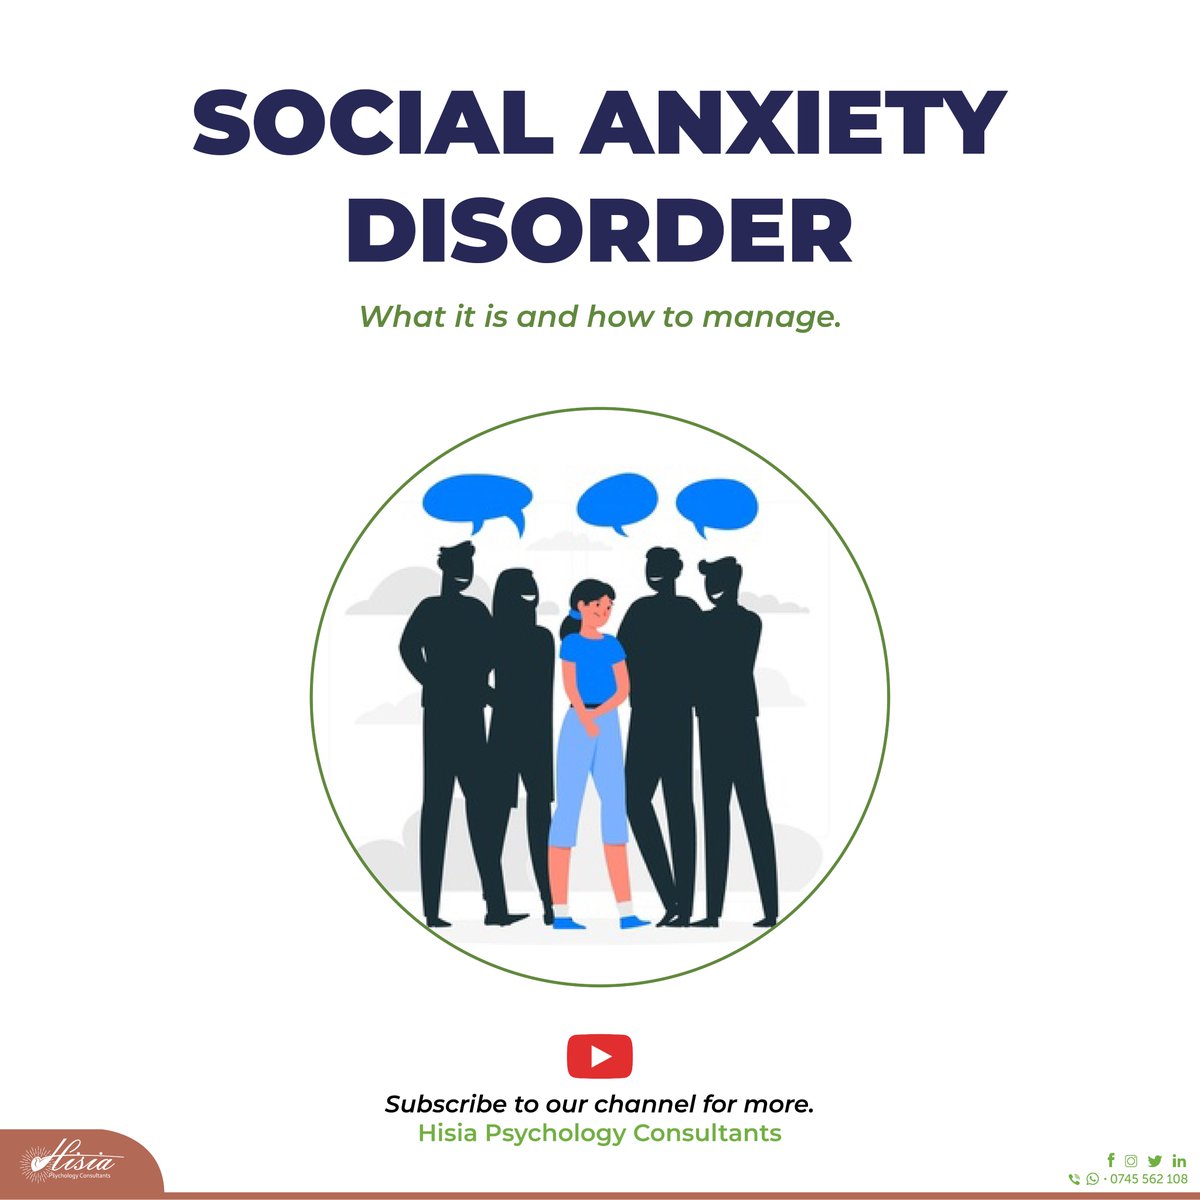 (LINK ⏬) Unknown to many, social anxiety disorder is said to be the third most prevalent psychiatric disorder in the world. For more of social anxiety disorder, watch this informative video in our YouTube channel. youtu.be/B0bksIvXEyo